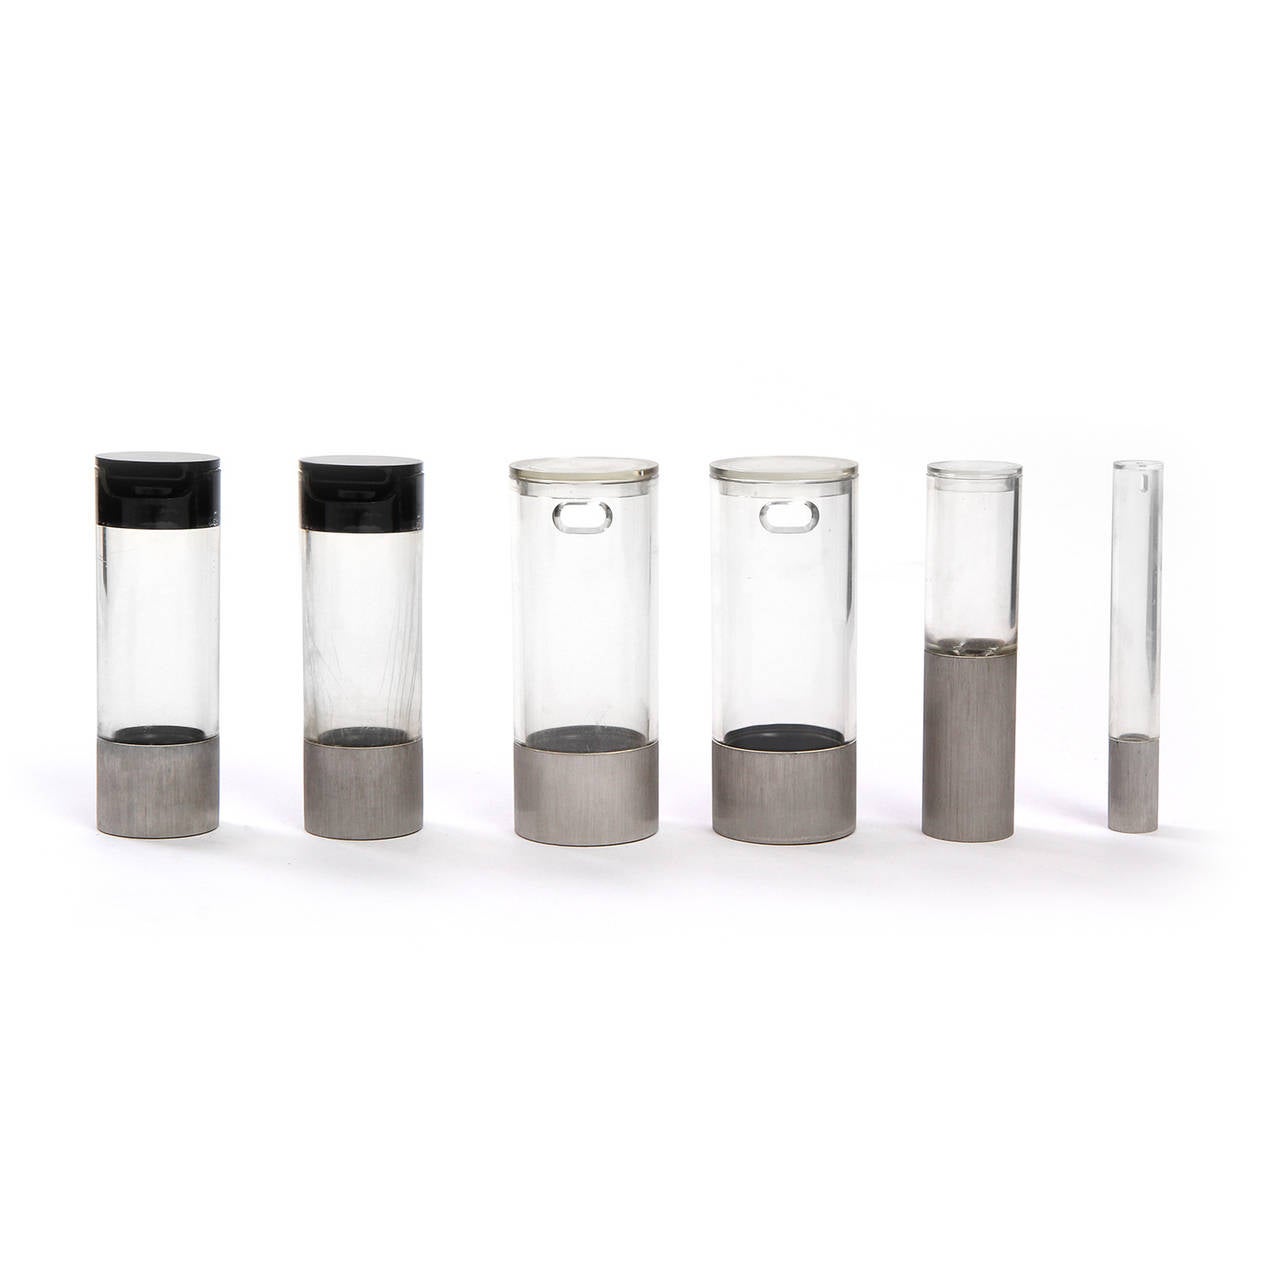 A masterfully designed modernist condiment tray of impeccable quality, the elements (salt shaker and pepper mill, oil and vinegar containers) made of Lucite and stainless steel are housed vertically in a fitted revolving circular stainless steel